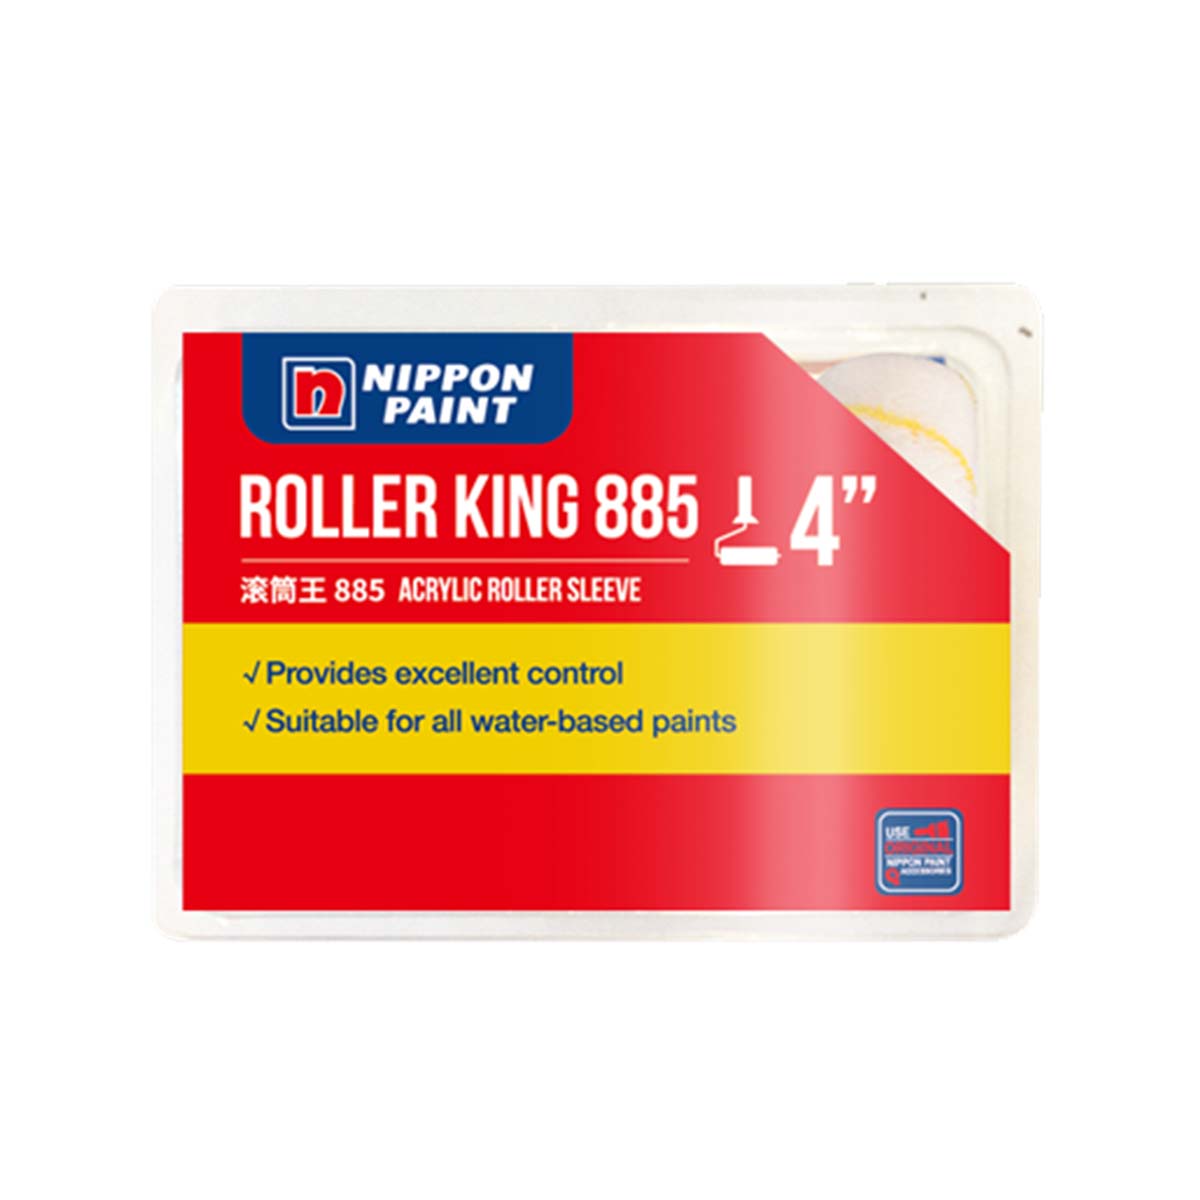 Nippon Roller King 885 4" Acrylic Roller